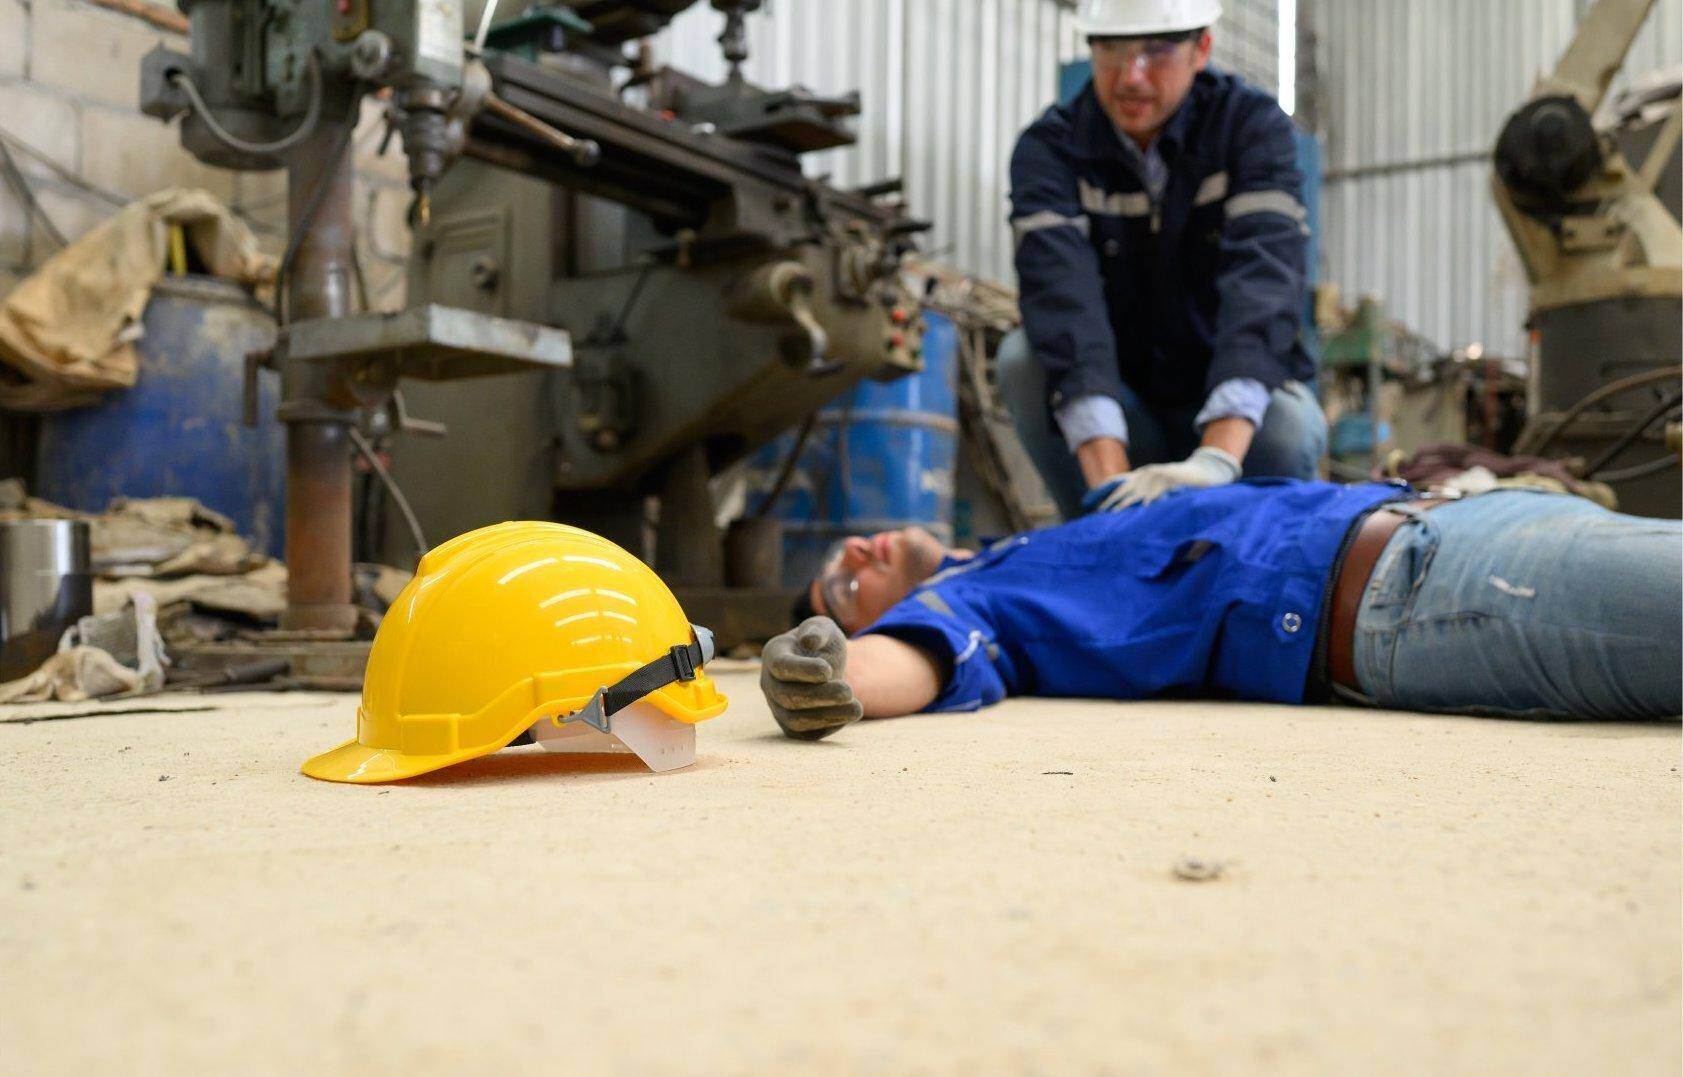 An unconscious man who has been injured on the job who will file for workers compensation in Candler-McAfee, Georgia